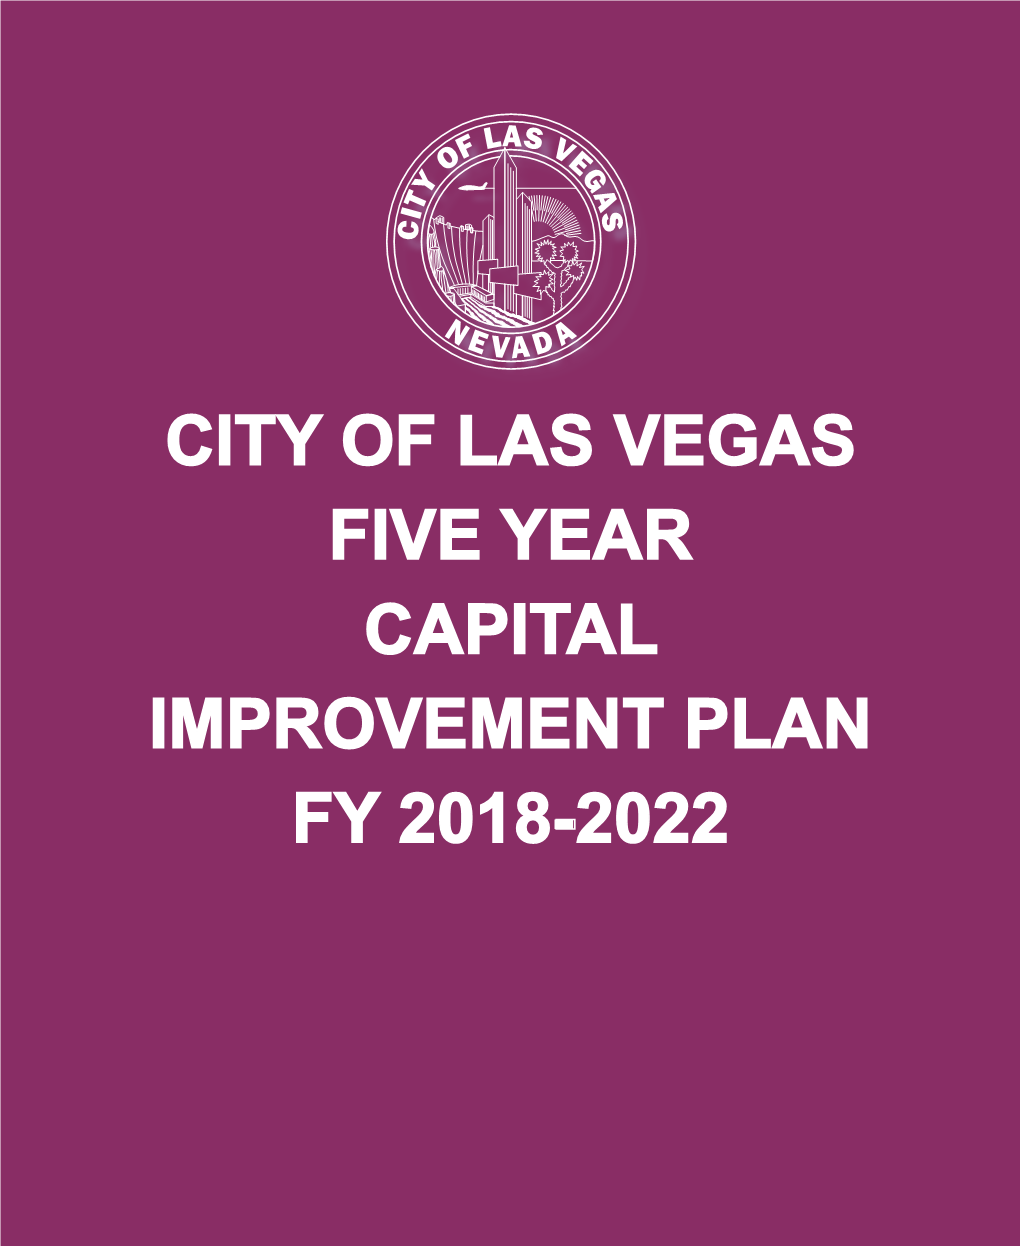 CITY of LAS VEGAS FIVE YEAR CAPITAL IMPROVEMENT PLAN FY 2018-2022 in Keeping with the City’S Sustainability Efforts, This Book Has Been Printed on Recycled Paper